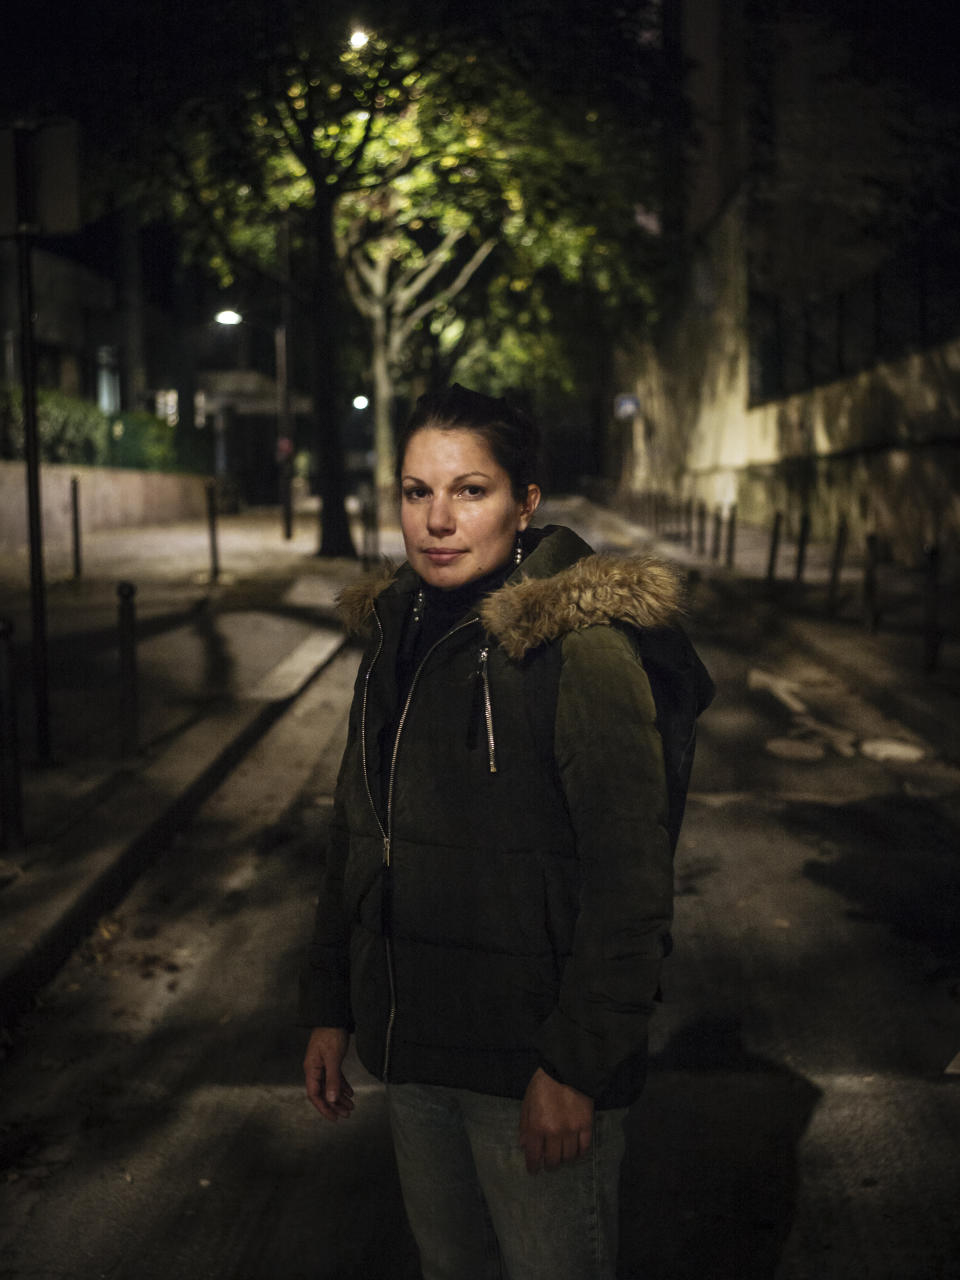 In this Oct. 31 2019 photo, Mathilde, 31, a jewelry student from Marseille, poses for a portrait in Paris. Mathilde experienced domestic violence when she was 21. Ten years later, she finally took back control of her life. Pasting is for her the way not to be a victim anymore and take back control of her fear. (AP Photo/Kamil Zihnioglu)